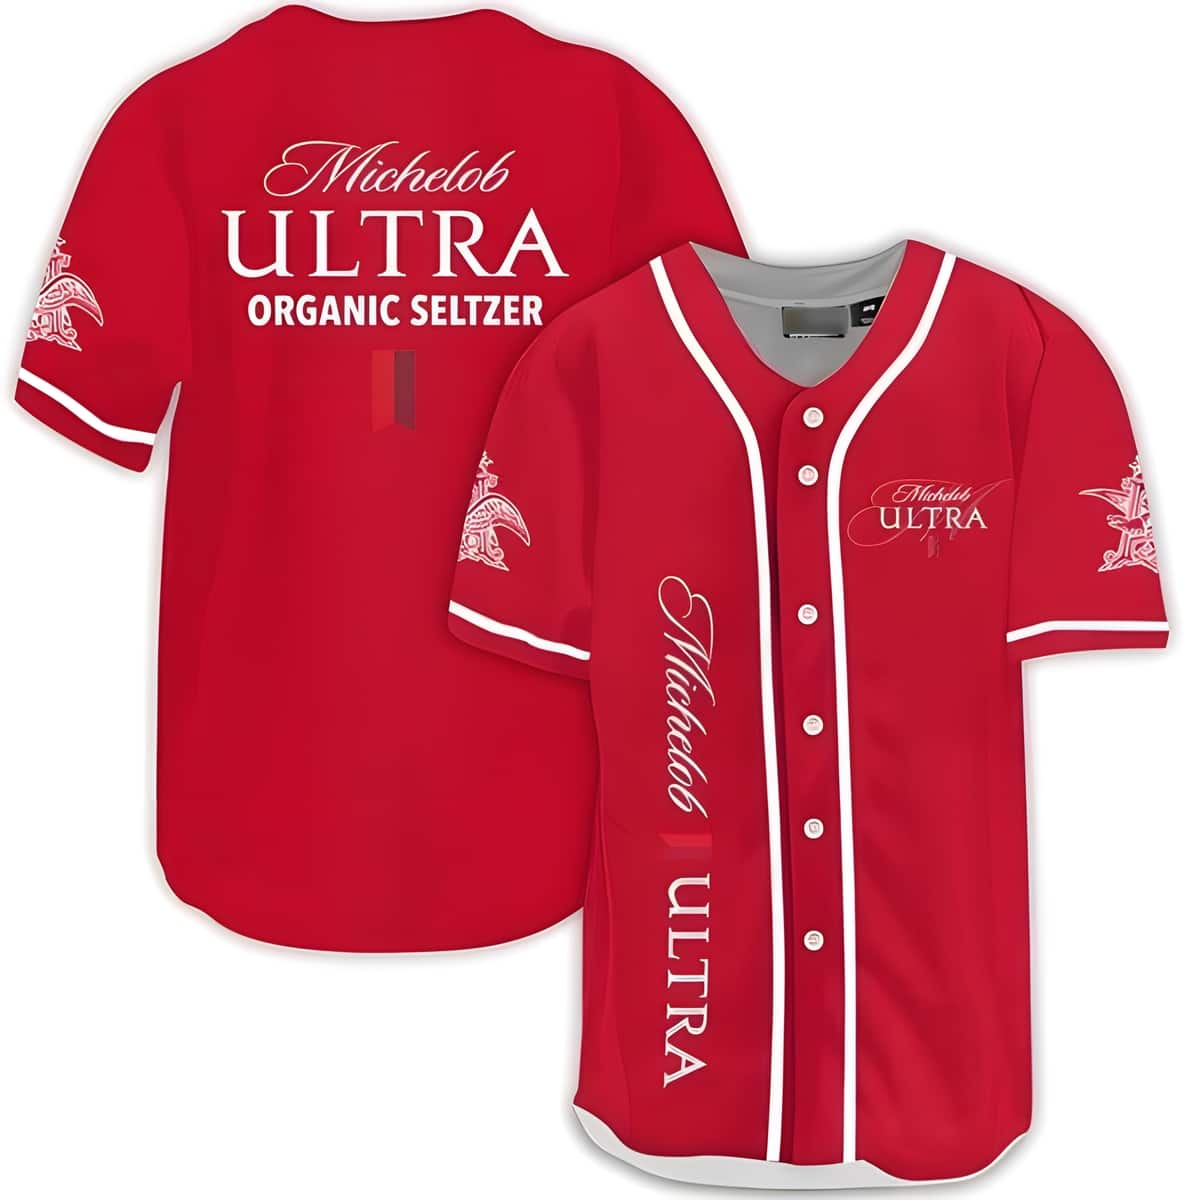 Classic Red Michelob ULTRA Baseball Jersey Organic Seltzer Gift For Family